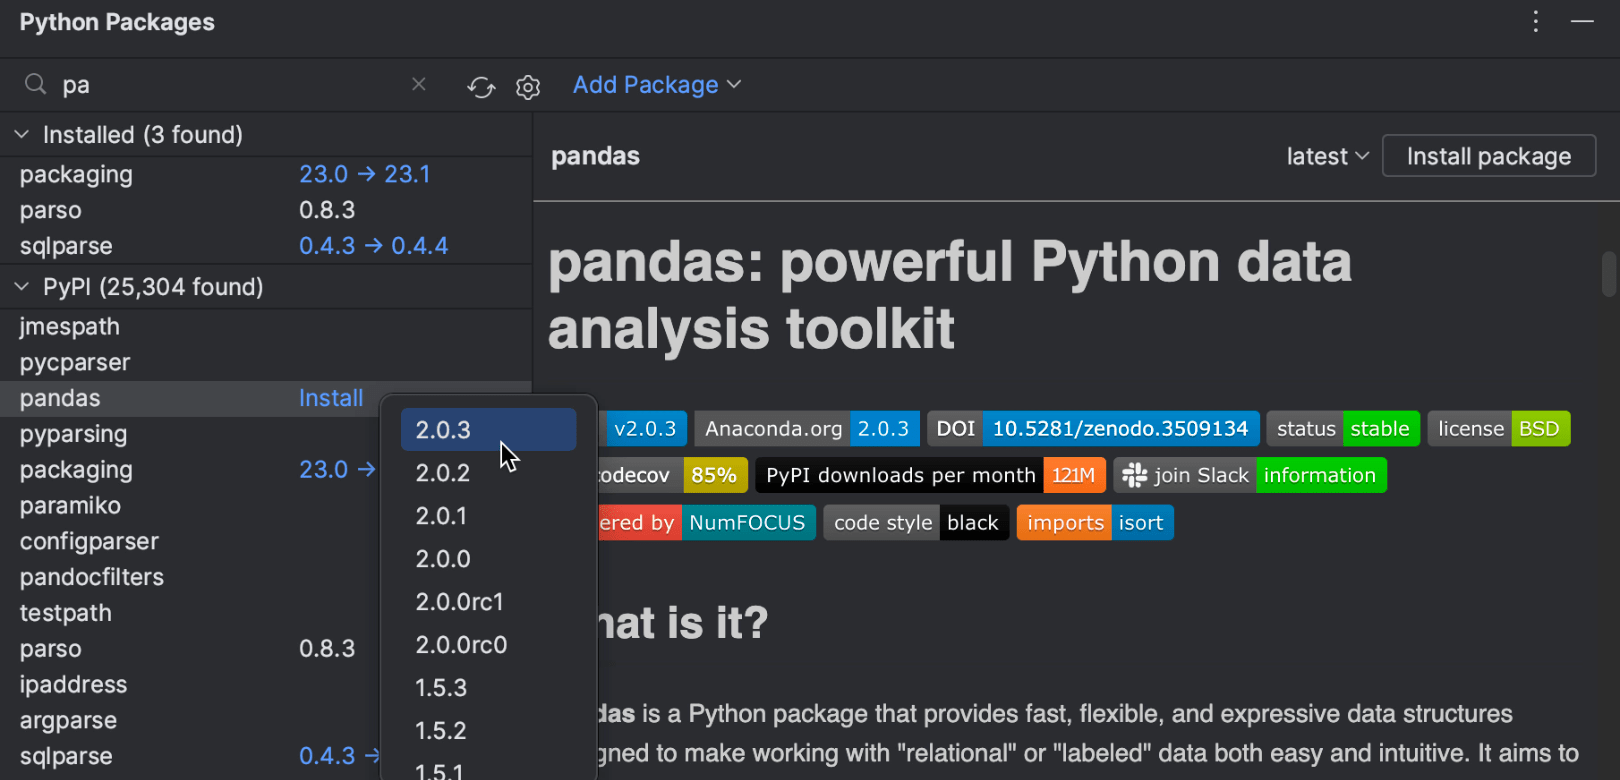 Option to update packages from the Python Packages tool window